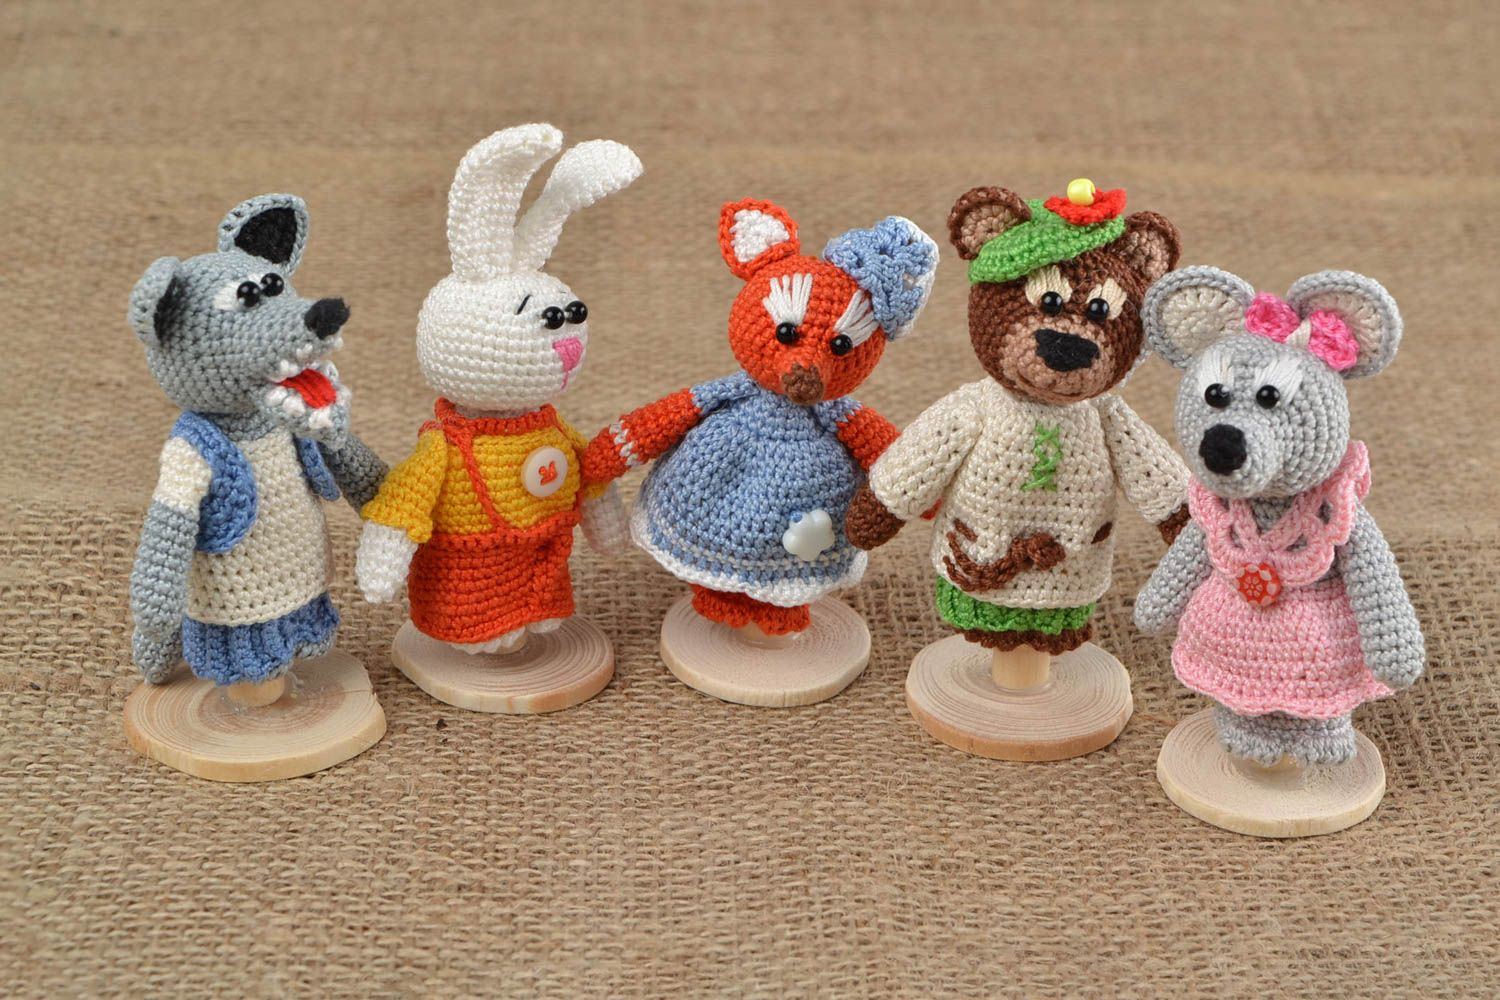 Handmade toy unusual finger toy set of 5 items handmade crocheted finger toy photo 1